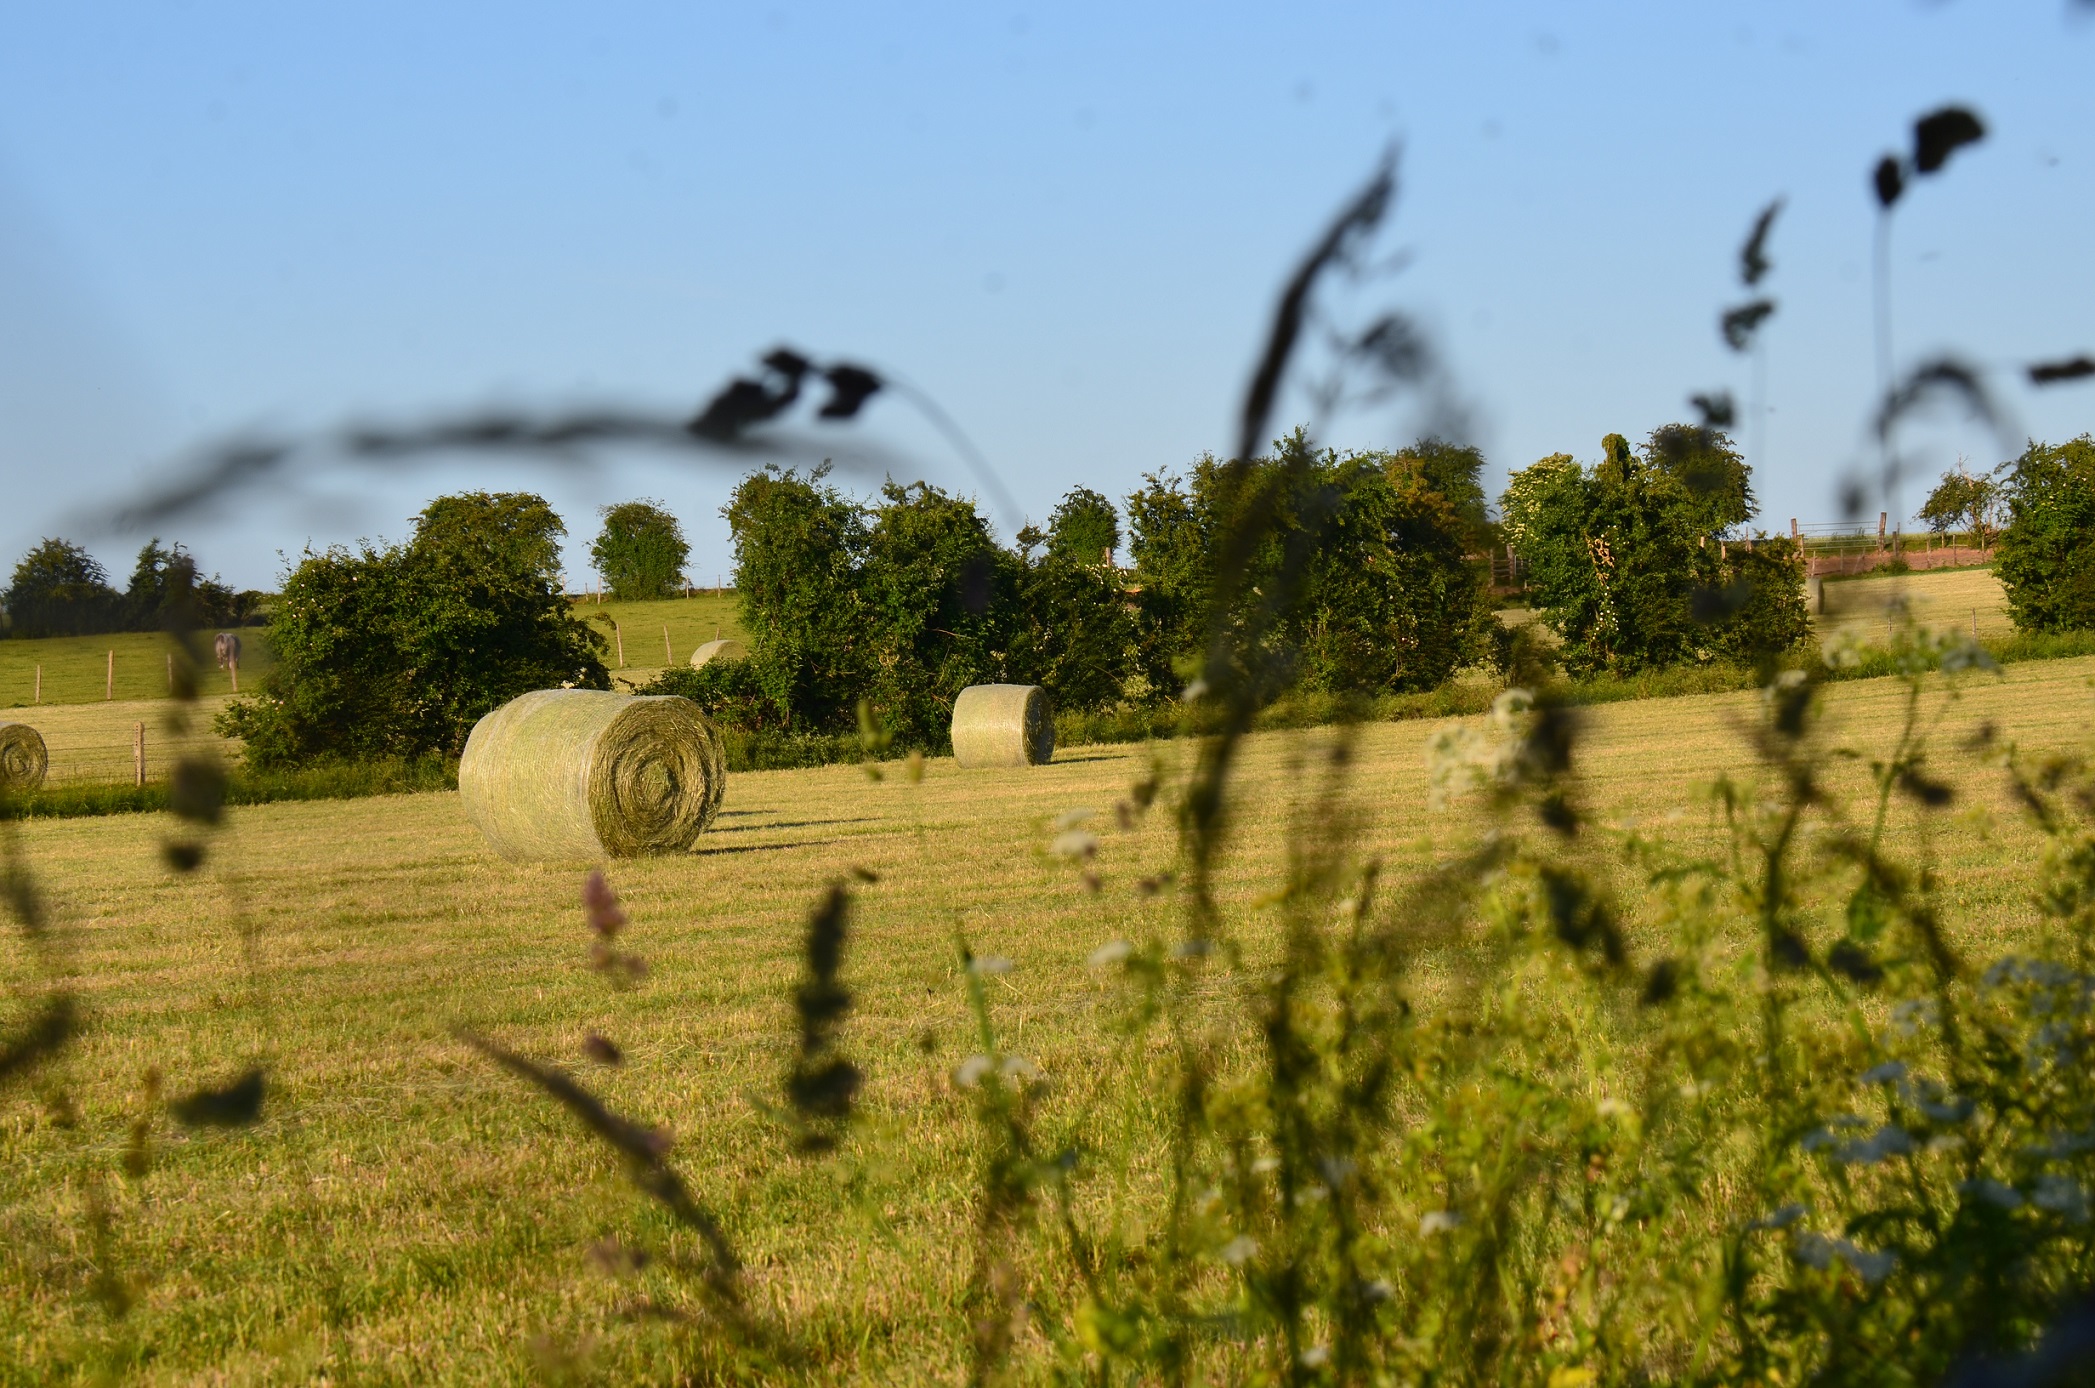 Hay : most commonly used source of forage for horses